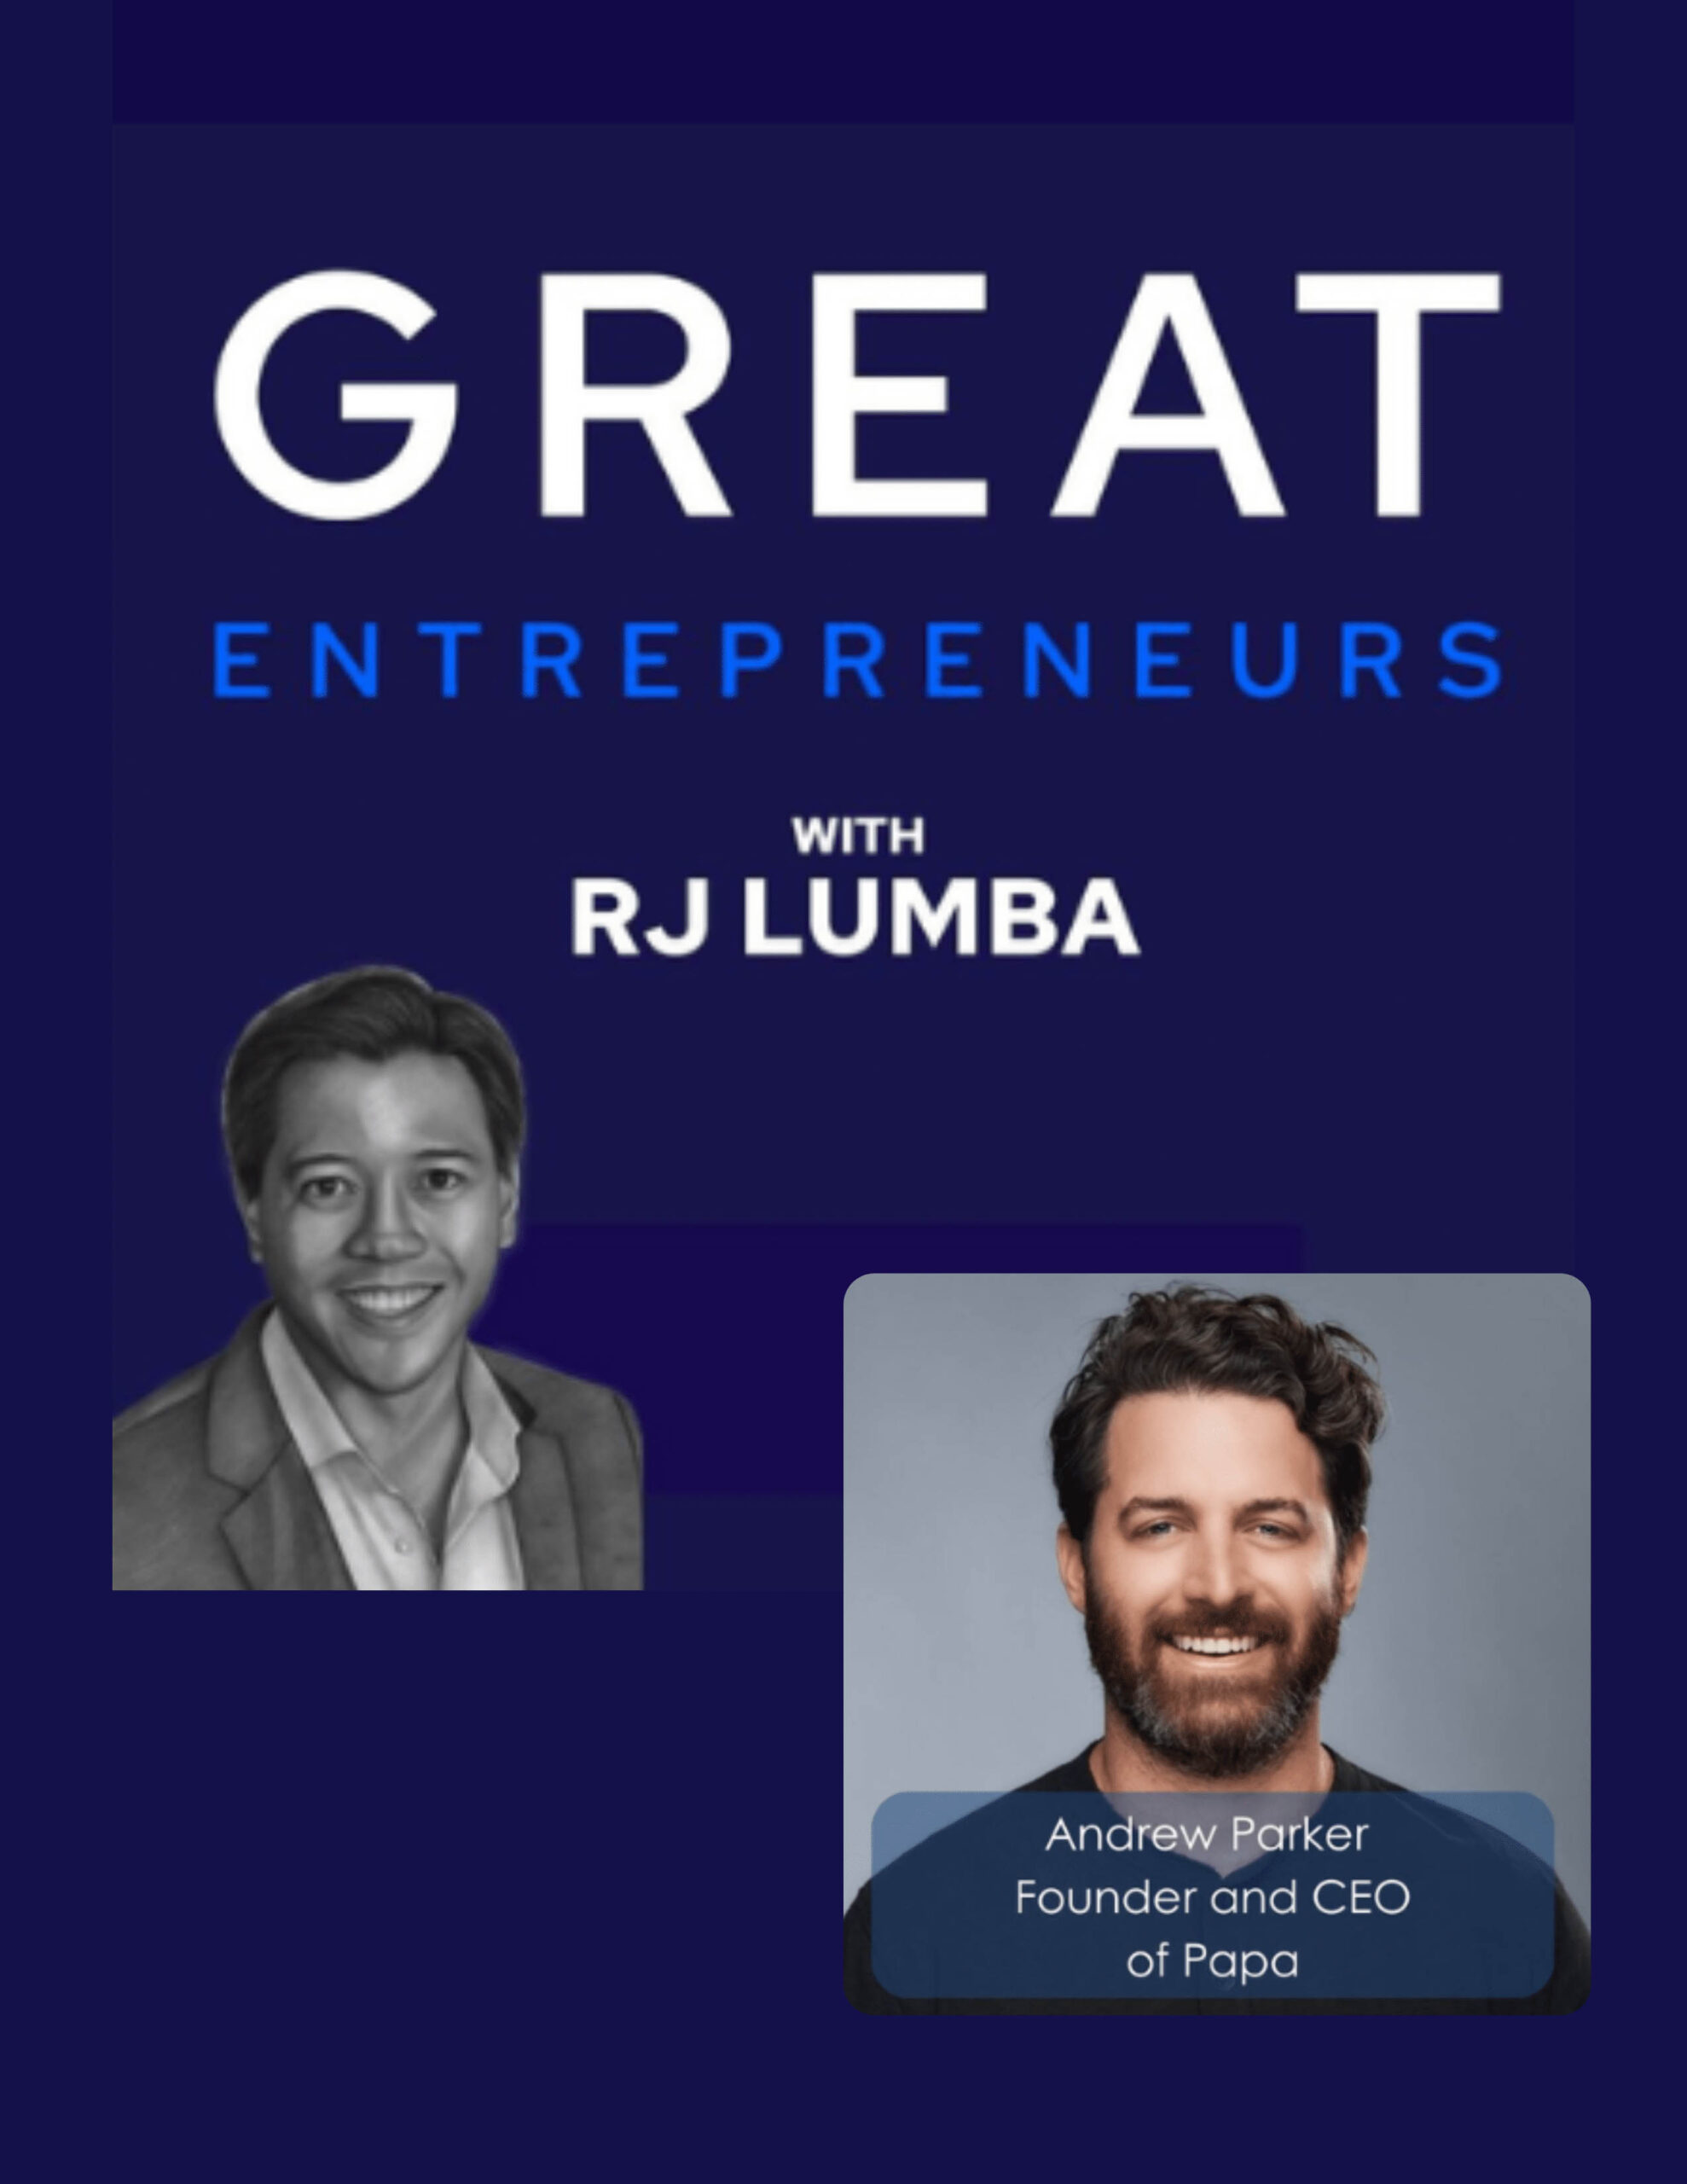 RJ Lumba podcast episode with Papa CEO, Andrew Parker.